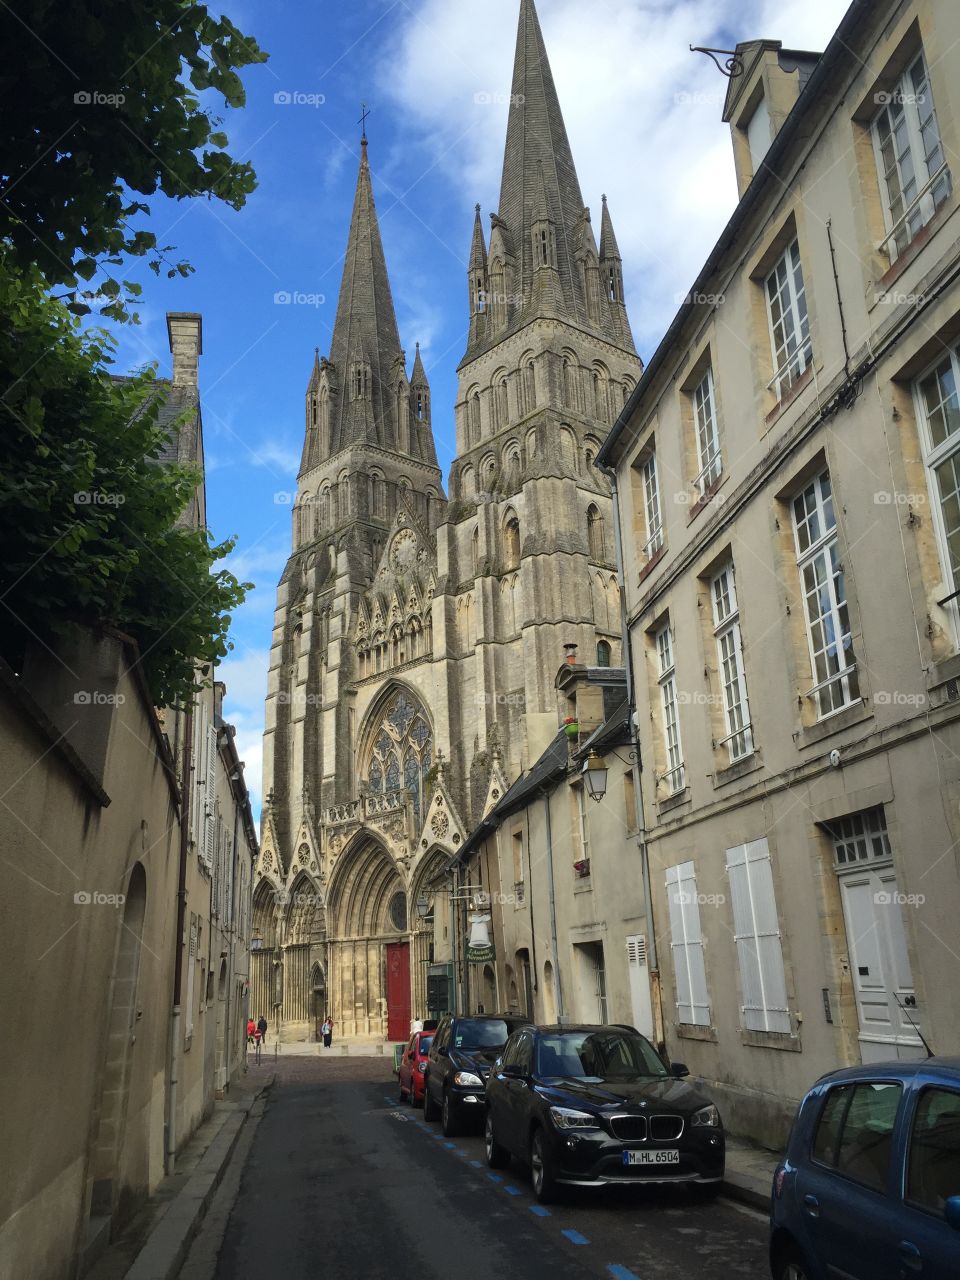 Street view of Bayeux Cathedral in Normandy, France